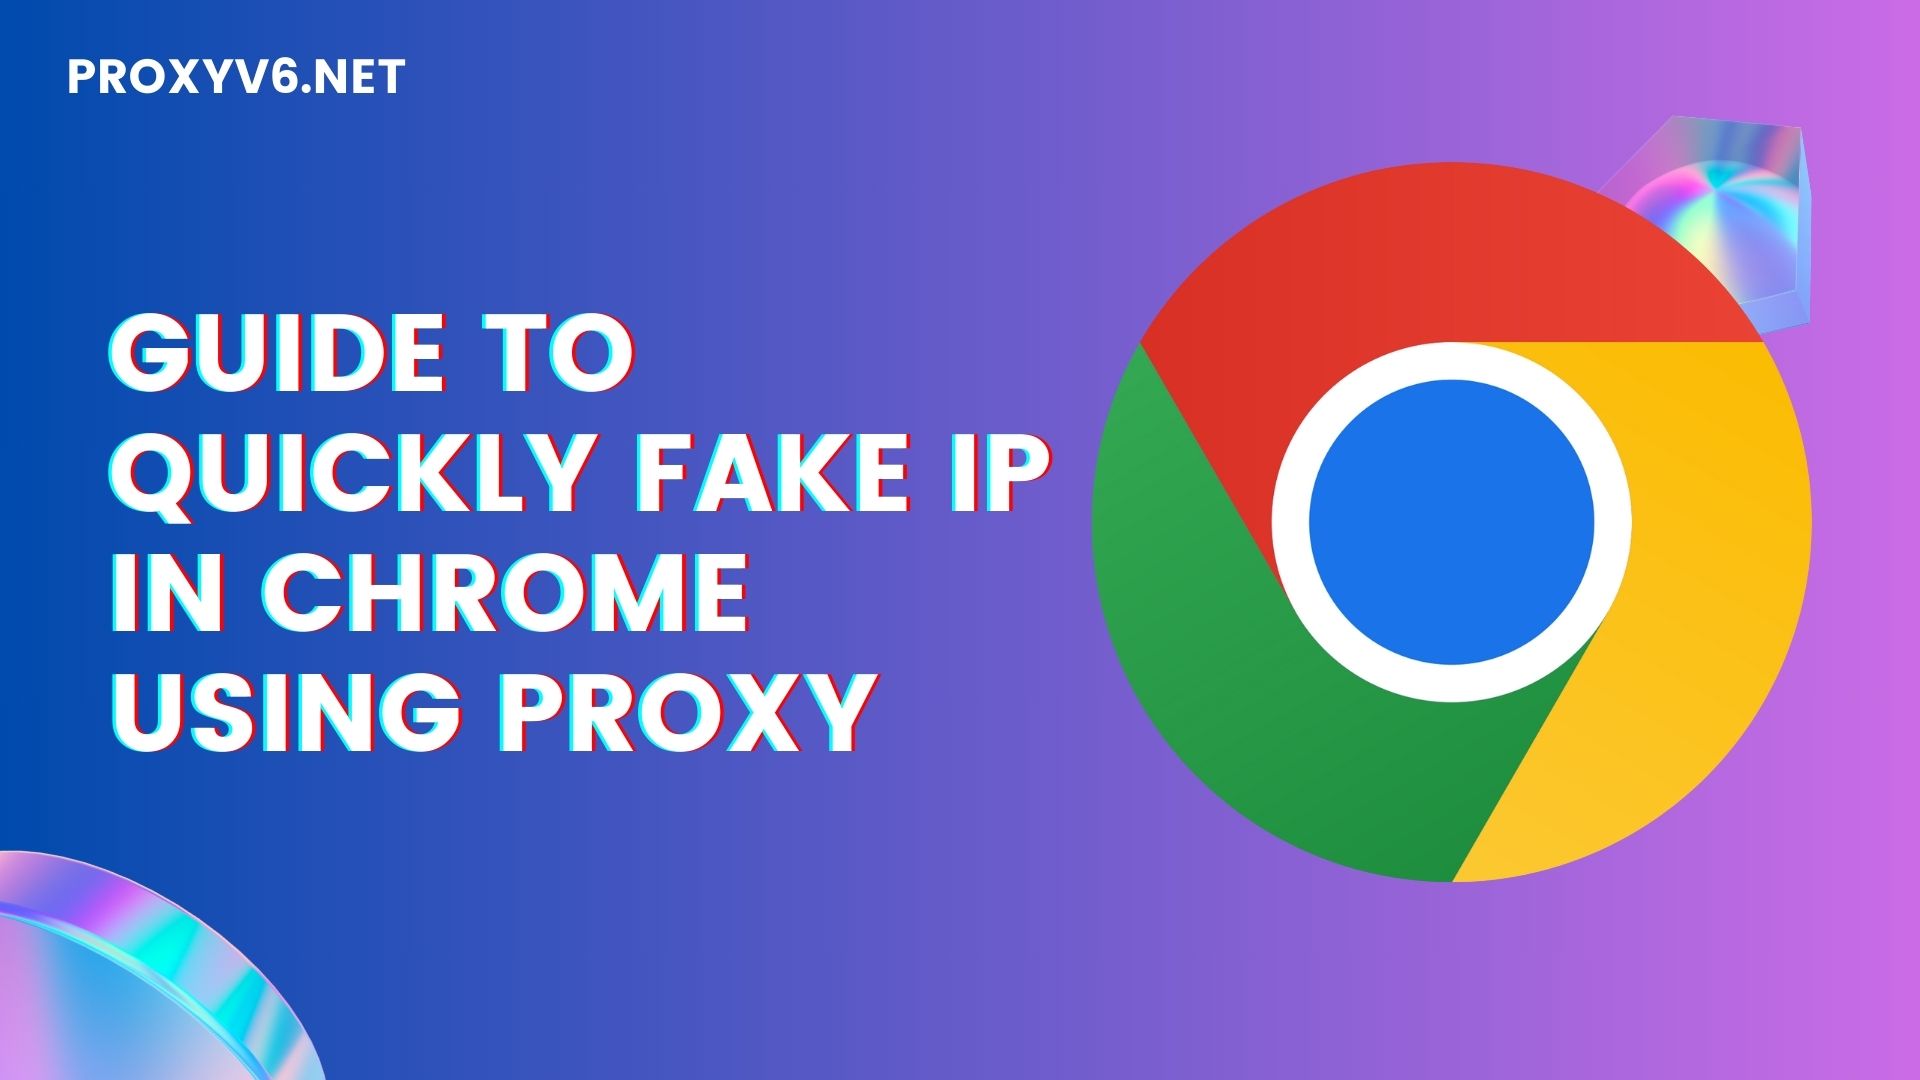 Guide to quickly fake IP in Chrome using Proxy